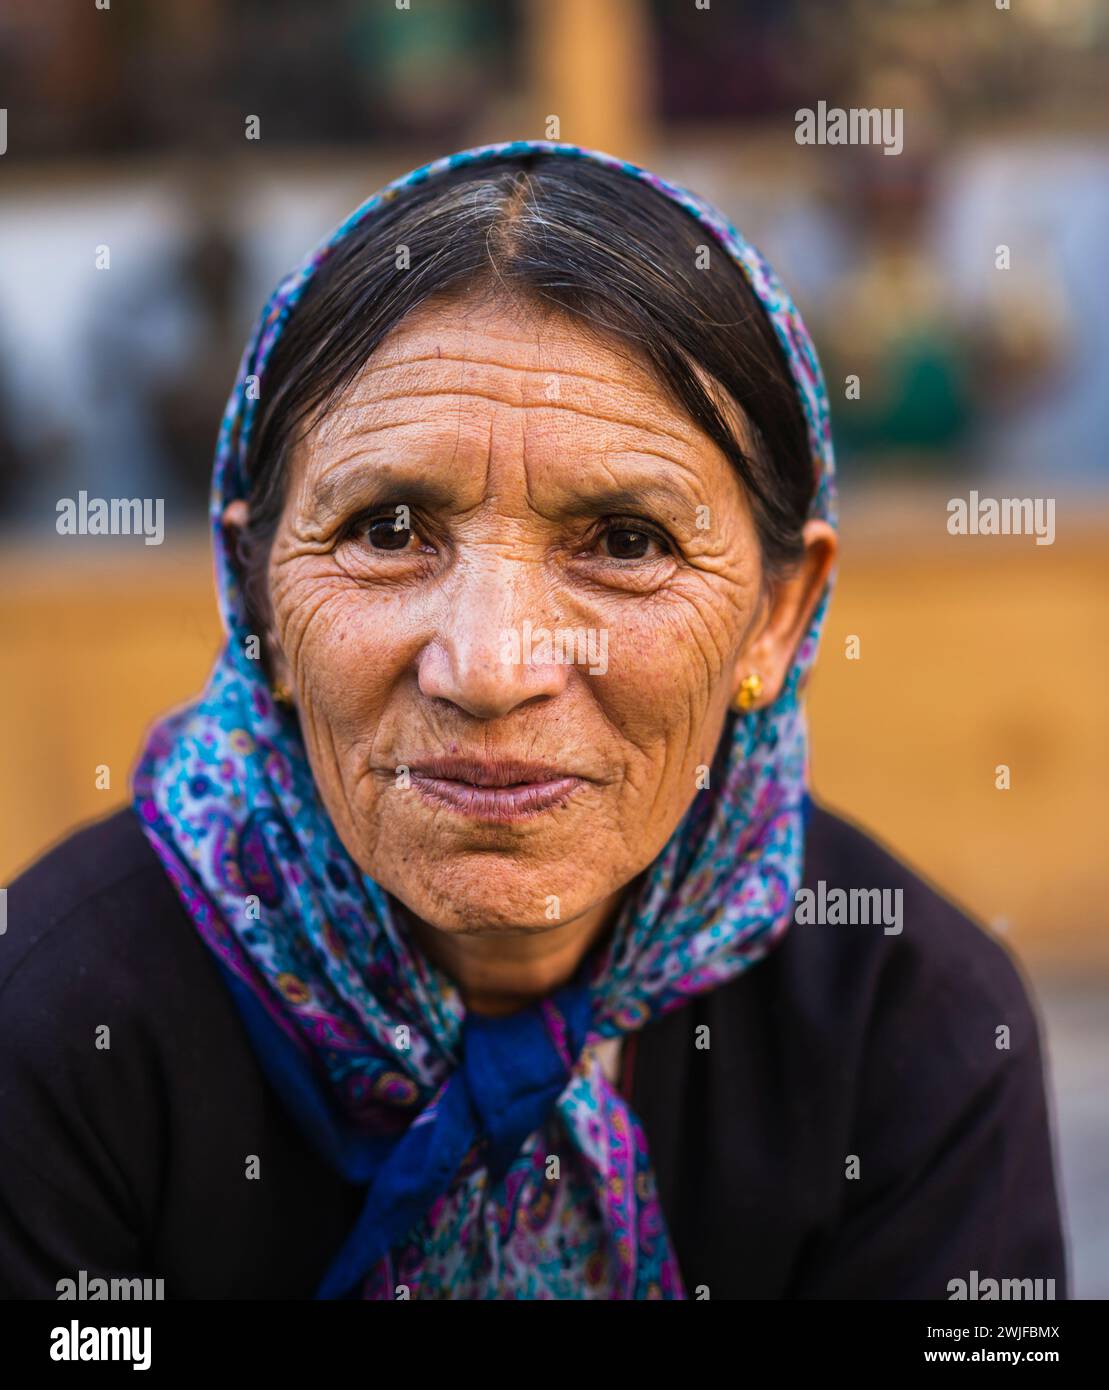 A portrait of a Ladakhi woman wearing a headscarf, looking at the camera. Stock Photo